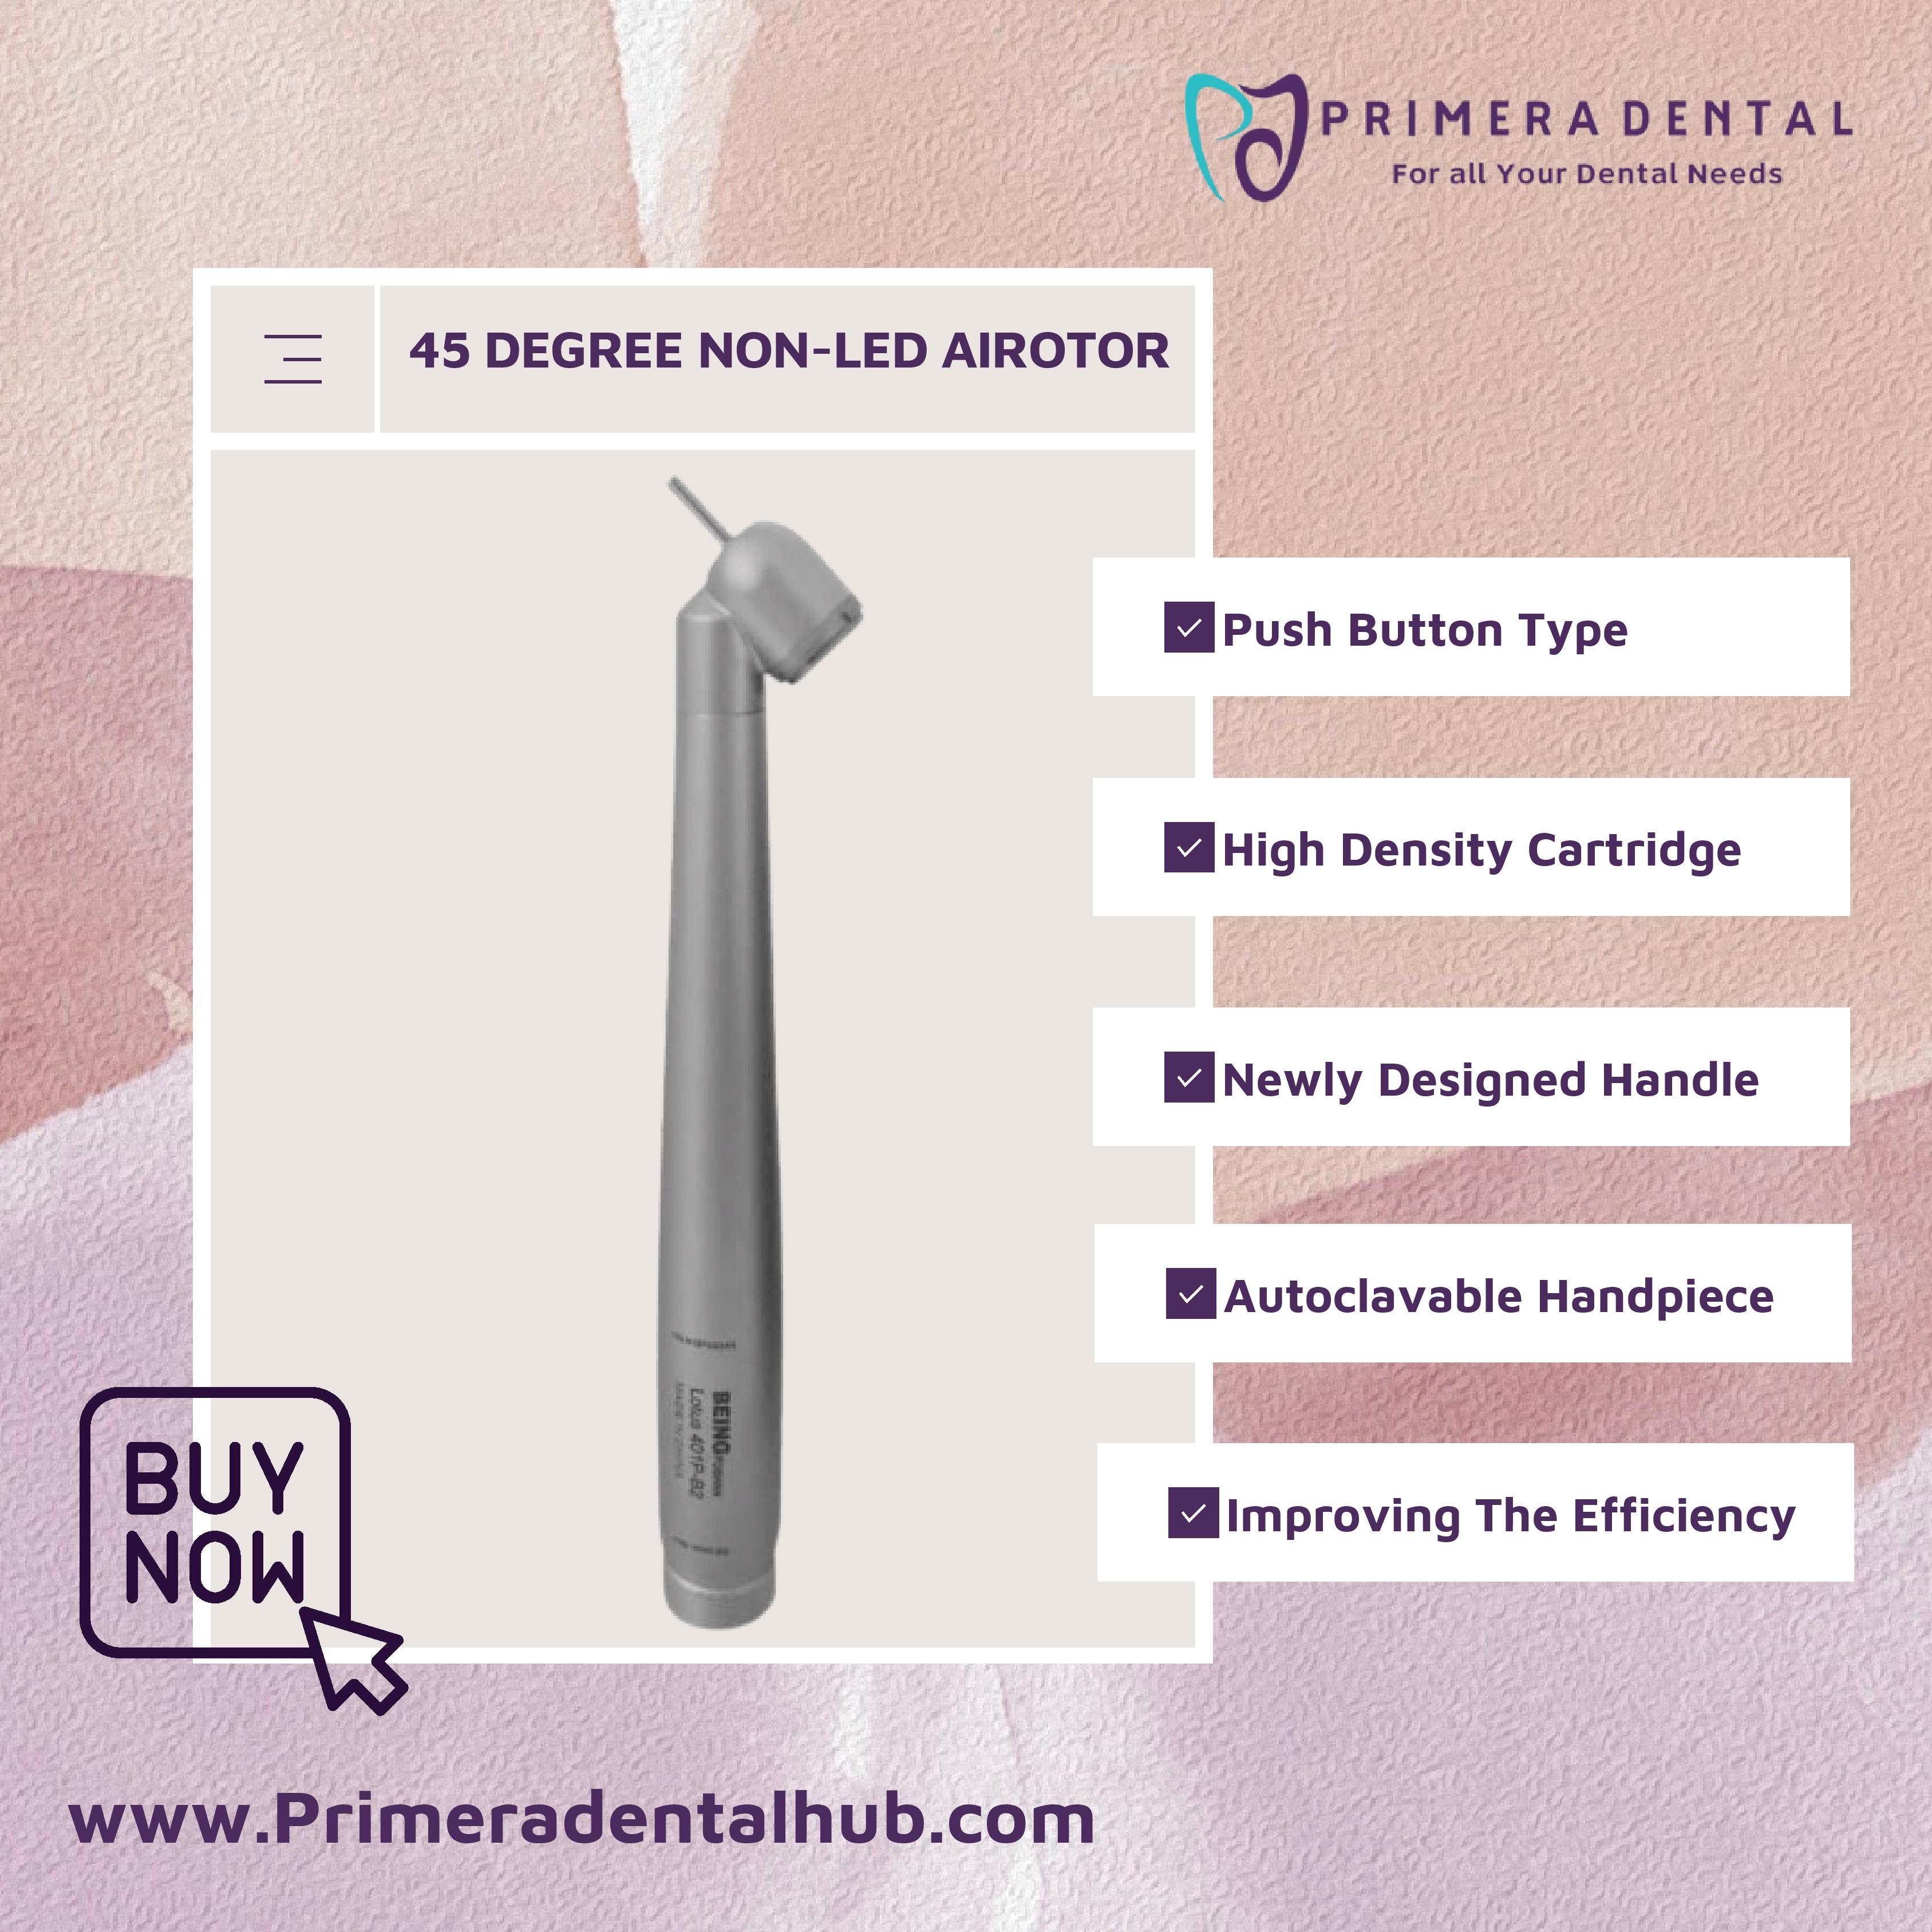 PRIMERADENTAL
For all Your Dental Needs

— 45 DEGREE NON-LED AIROTOR

BUY
NOW

w

wwWw.Primeradentalhub.com

 

Push Button Type
BE High Density Cartridge
BE Newly Designed Handle

M Autoclavable Handpiece

oO Sig
a 2

AE

ar AY

Bimoroving The Efficiency